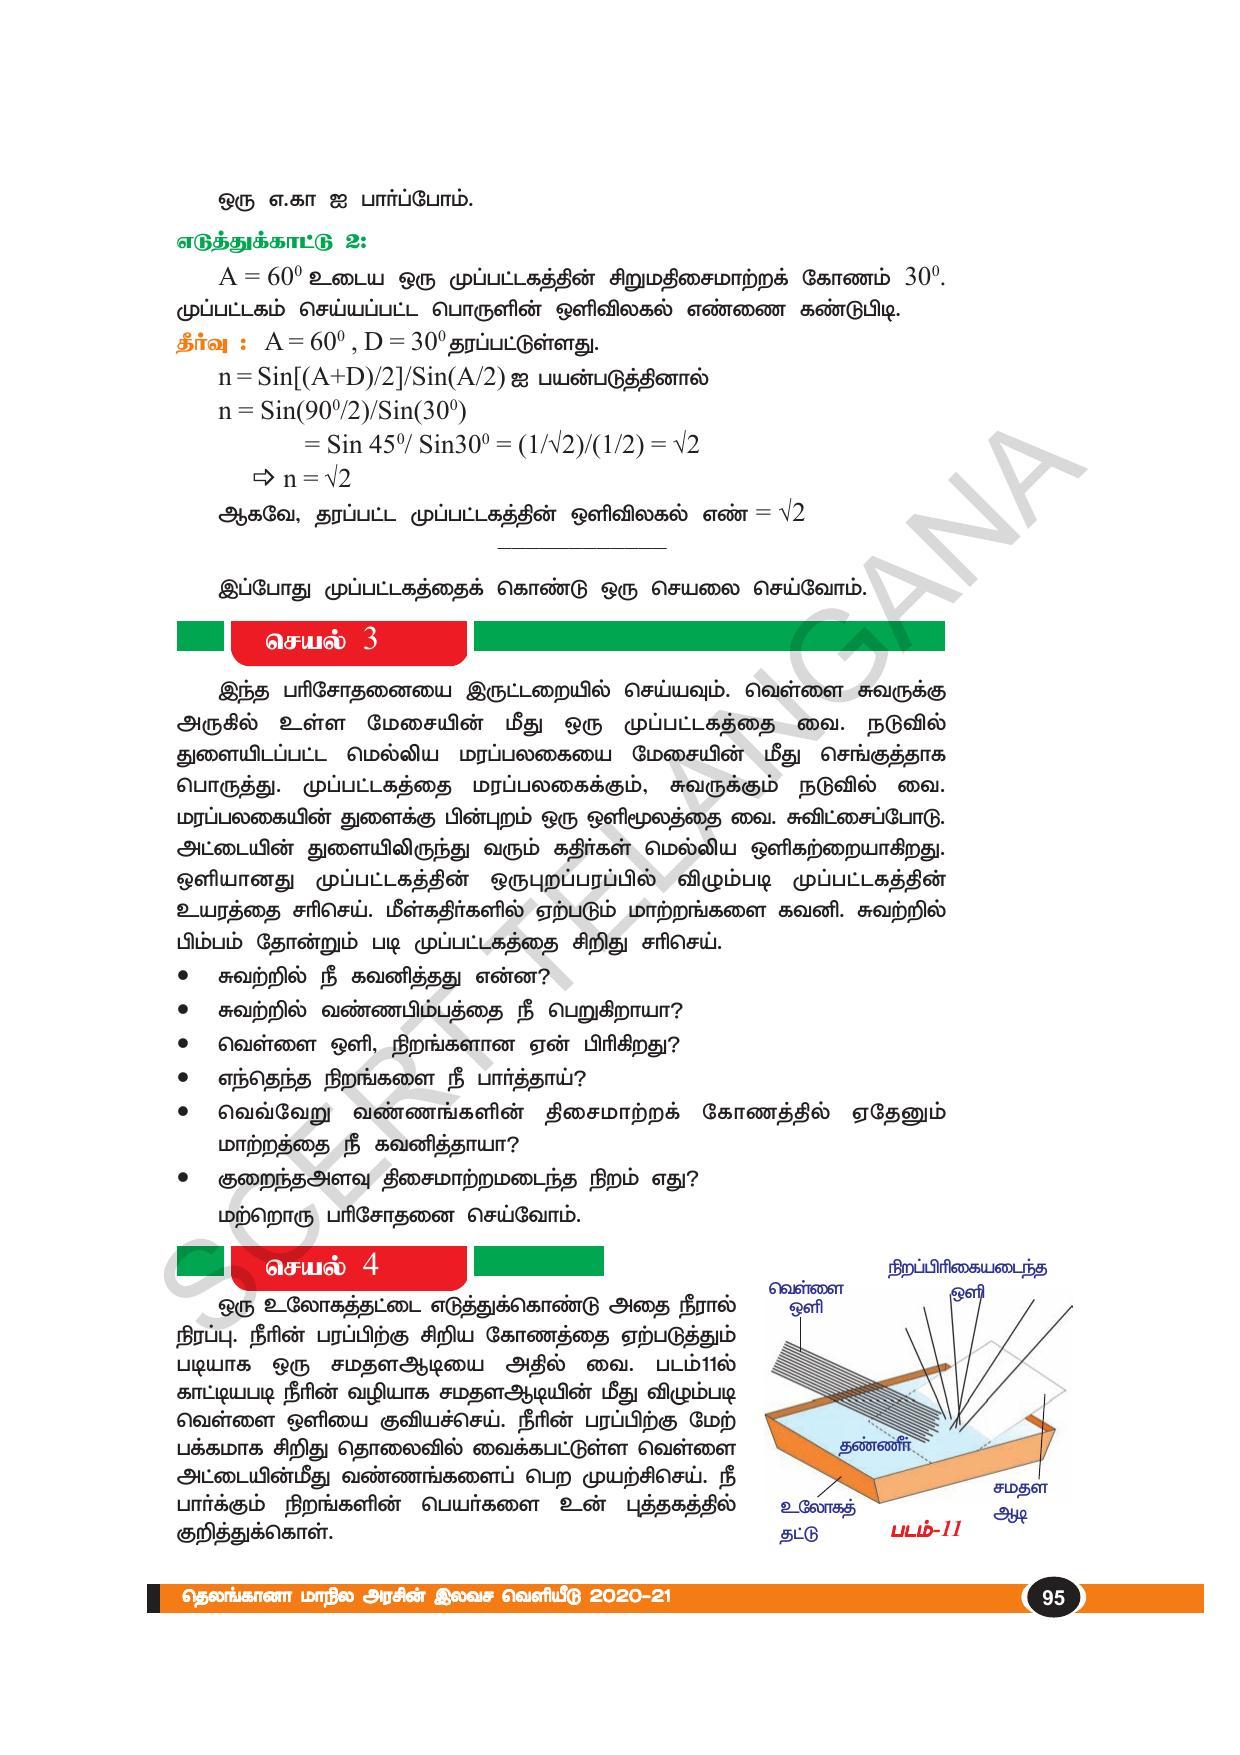 TS SCERT Class 10 Physical Science(Tamil Medium) Text Book - Page 107